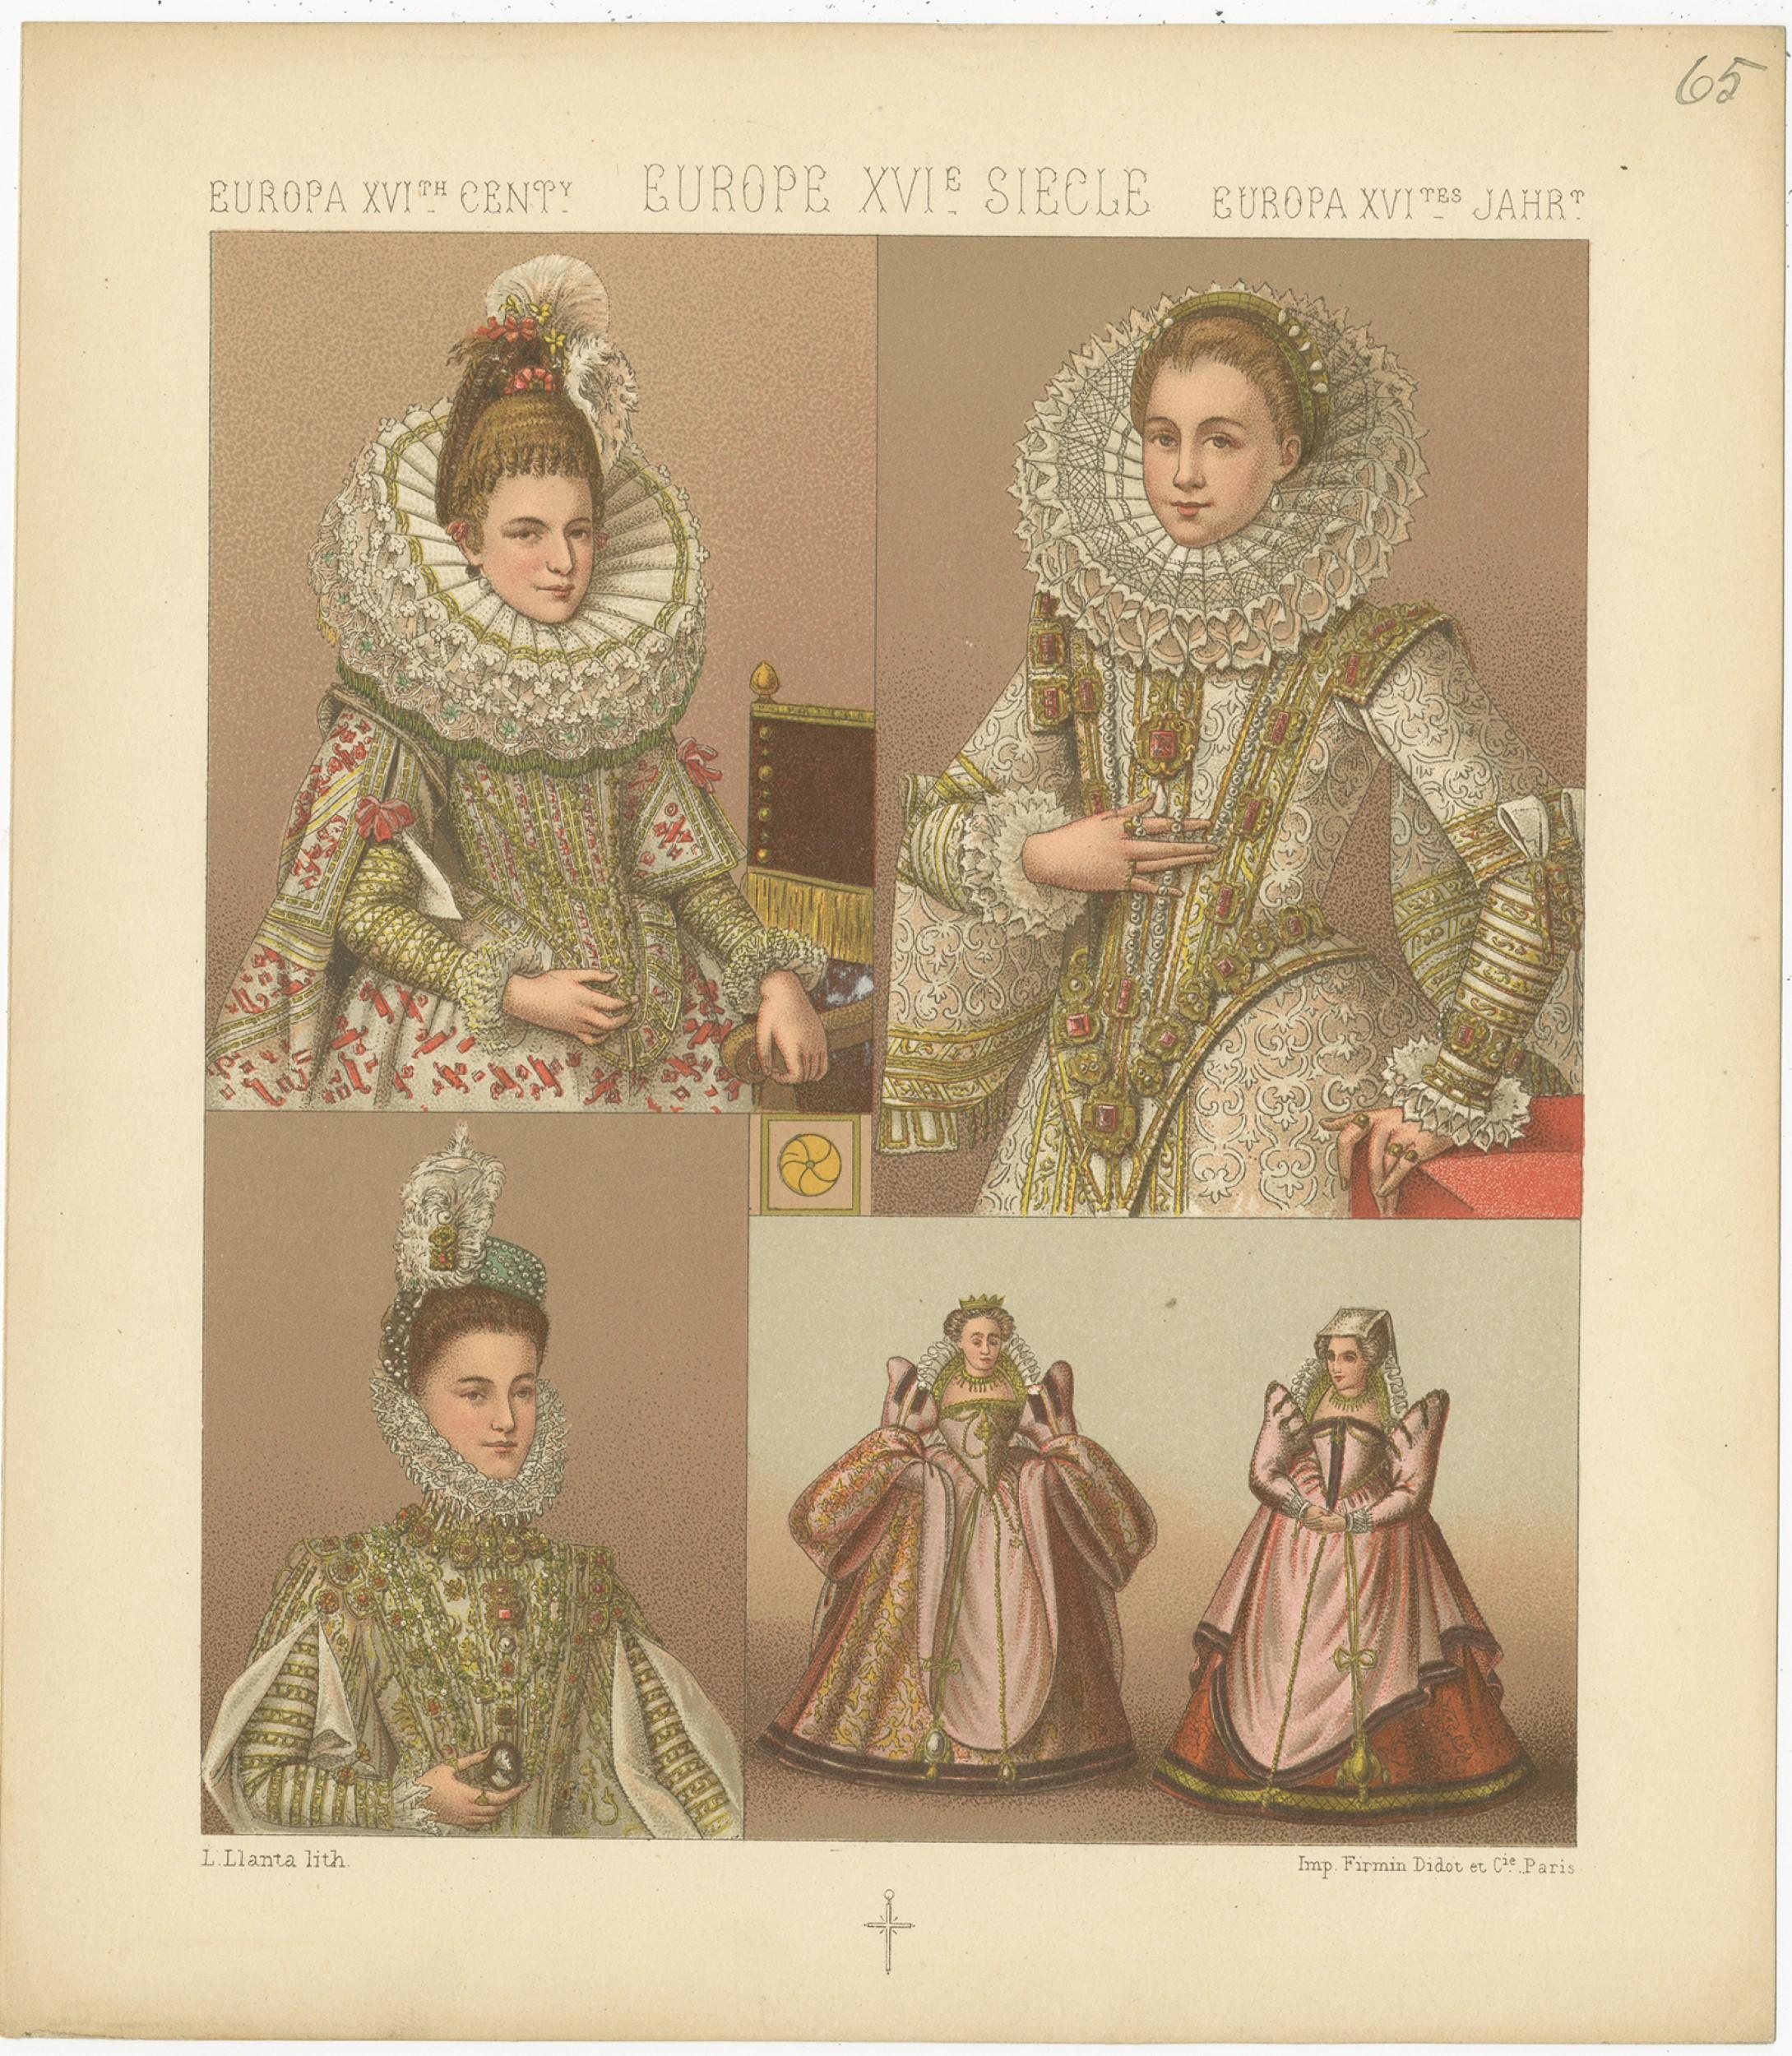 Pl. 65 Antique Print of European XVIth Century Costumes by Racinet 'circa 1880' In Good Condition For Sale In Langweer, NL